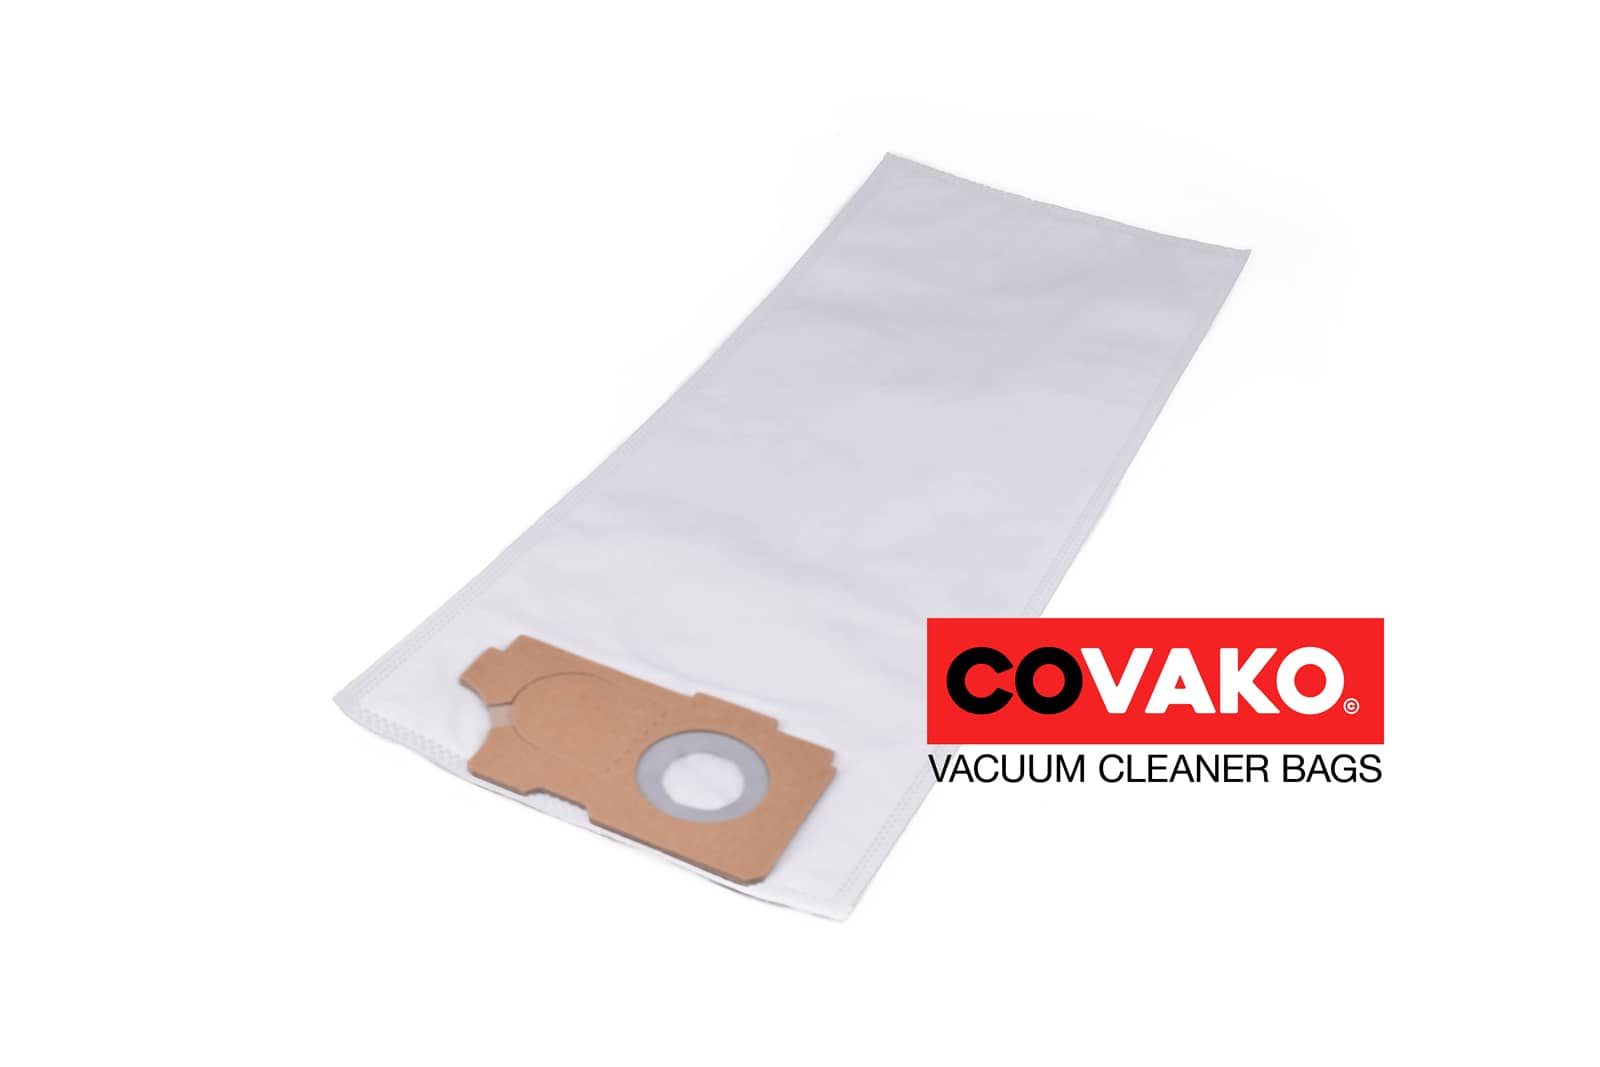 Ivac Comfort 46 / Synthesis - Ivac vacuum cleaner bags